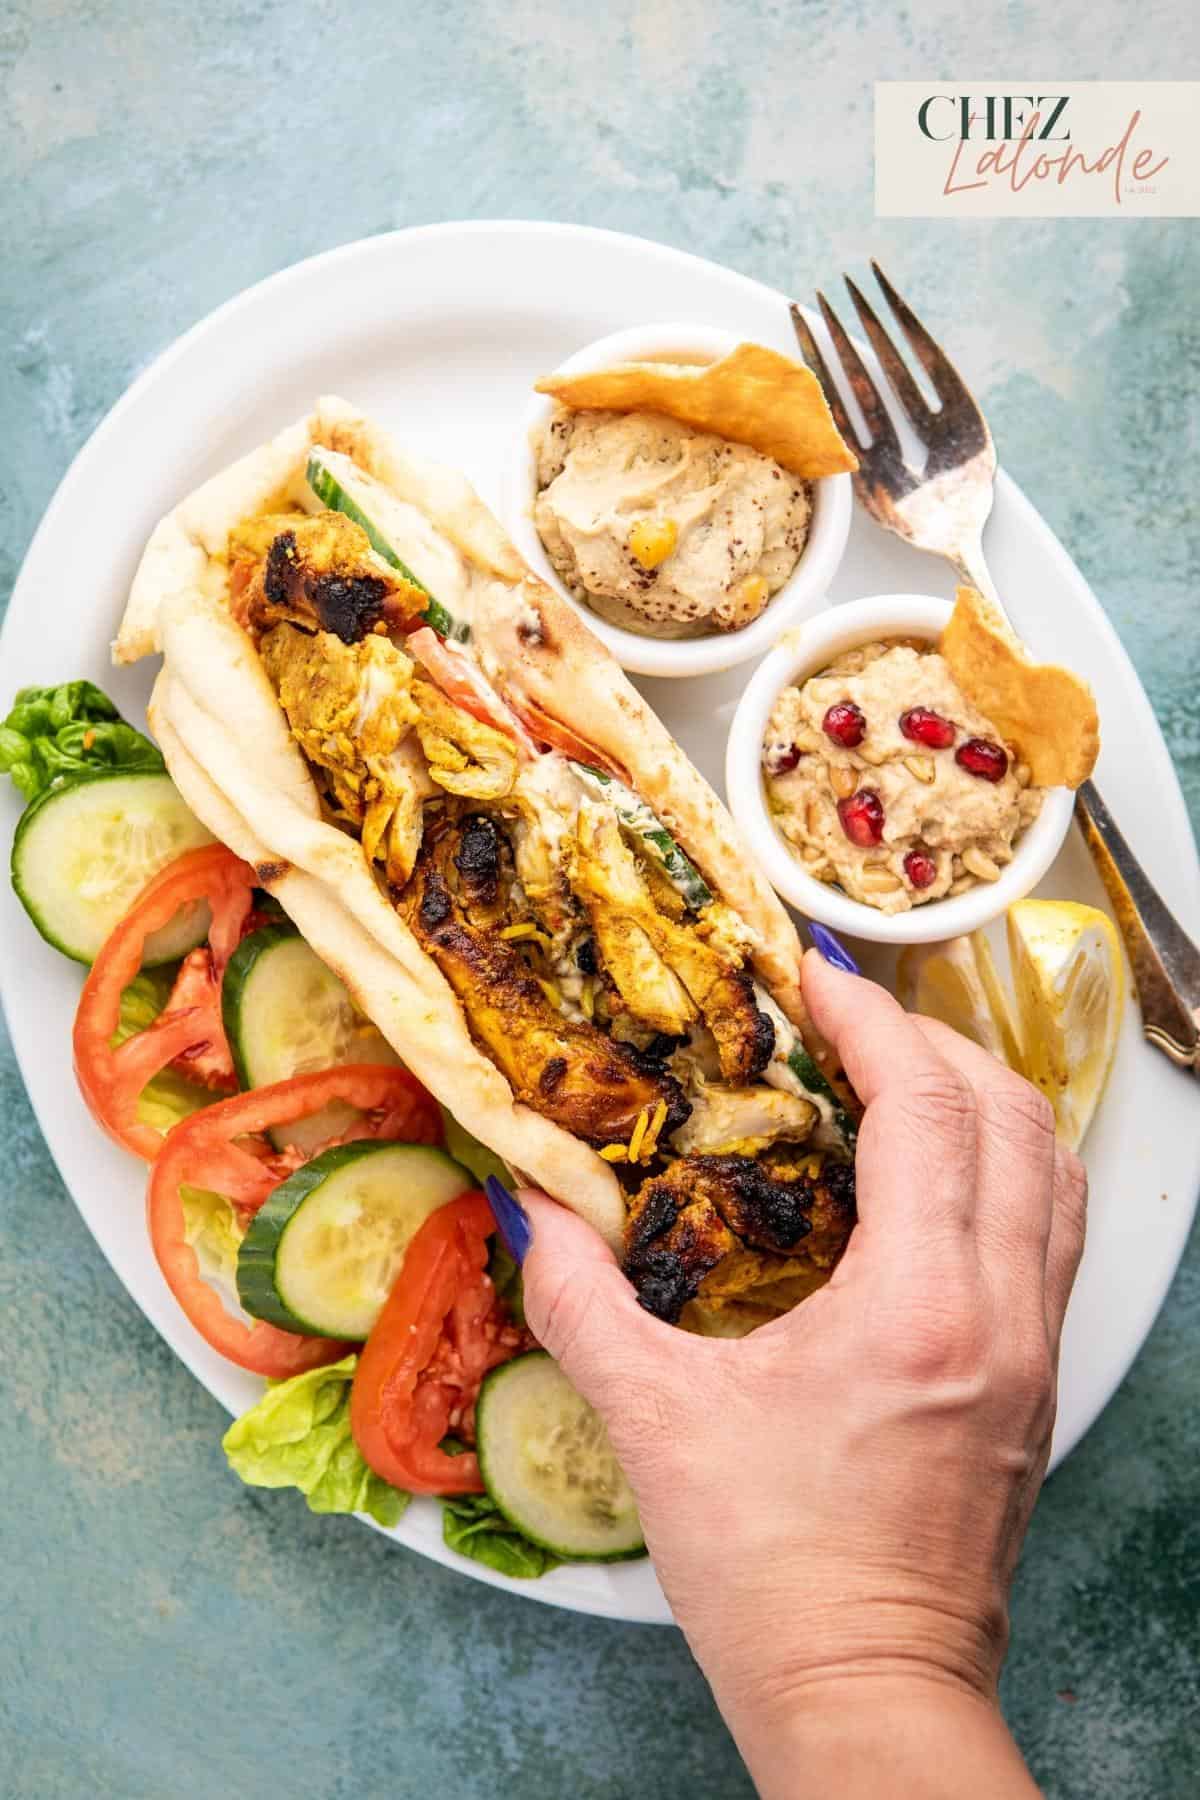 Air fryer chicken shawarma wrapped in Naan bread. Served with fresh vegetables and lemon wedges. To complete your mean, I have added a side of hummus, Baba ganoush and pita chips.